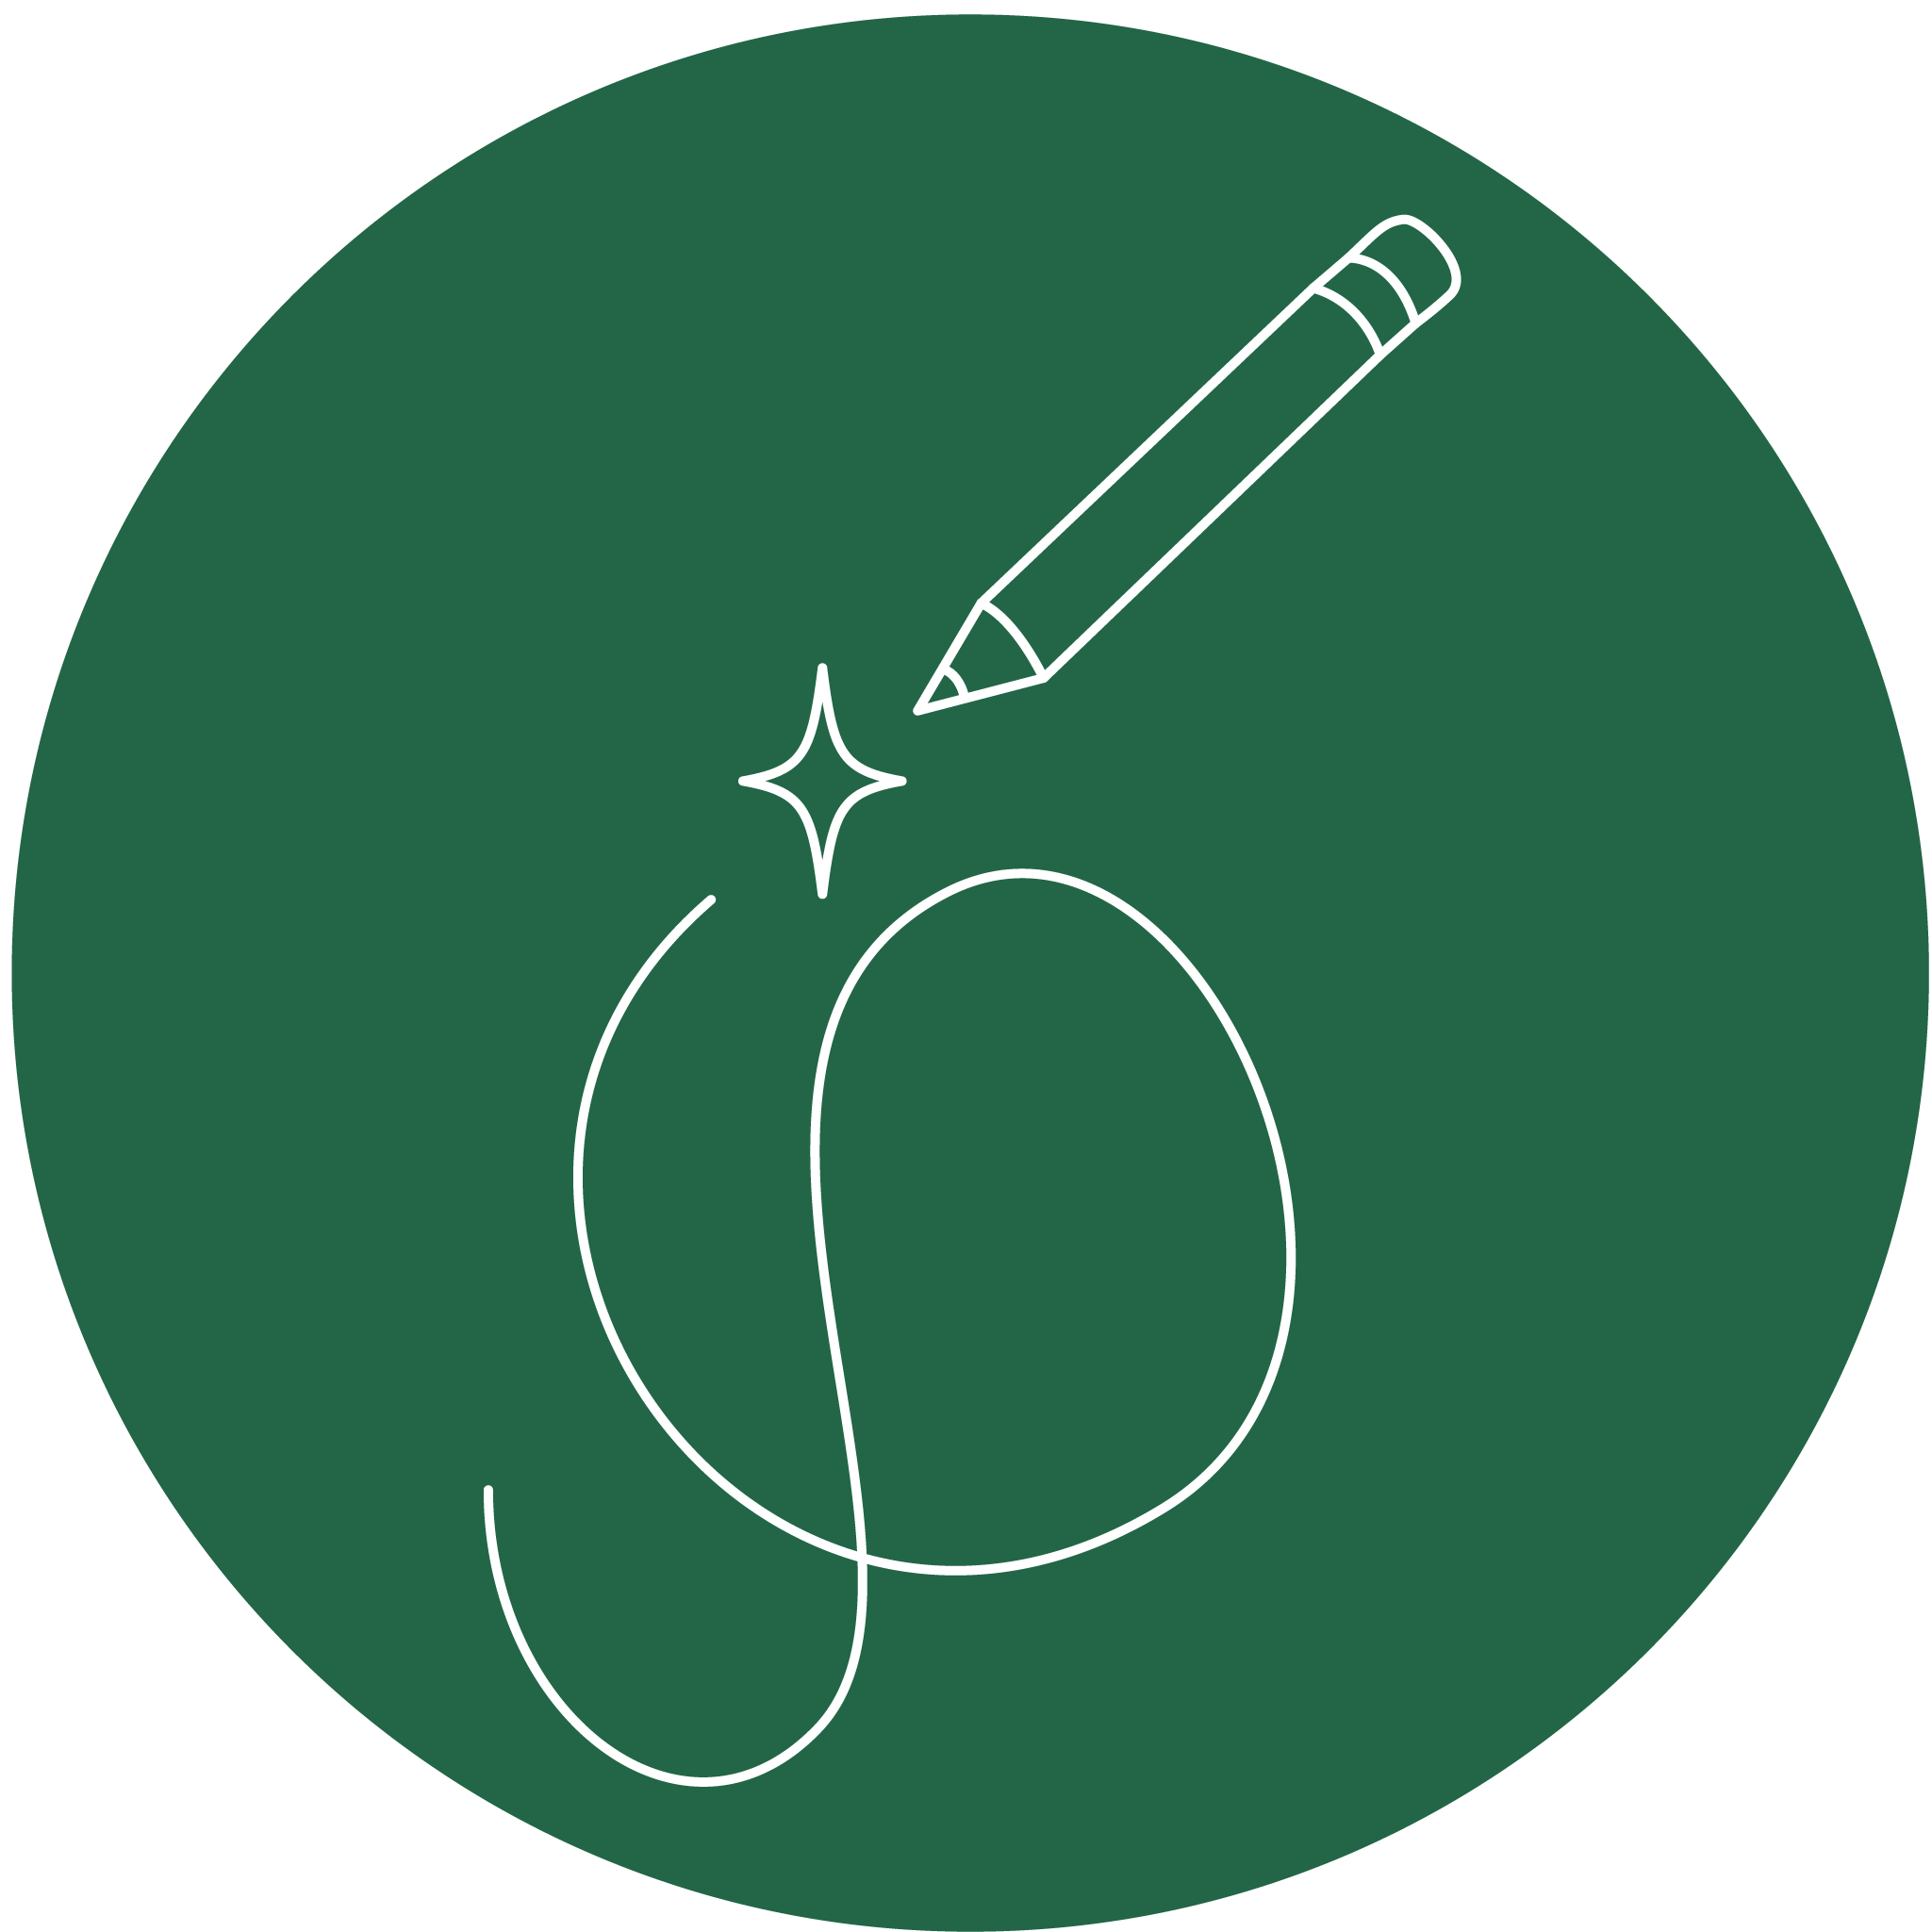 Icon for drawing. A pencil with trail and a star on a green background. Mostly works as decoration on about me page.